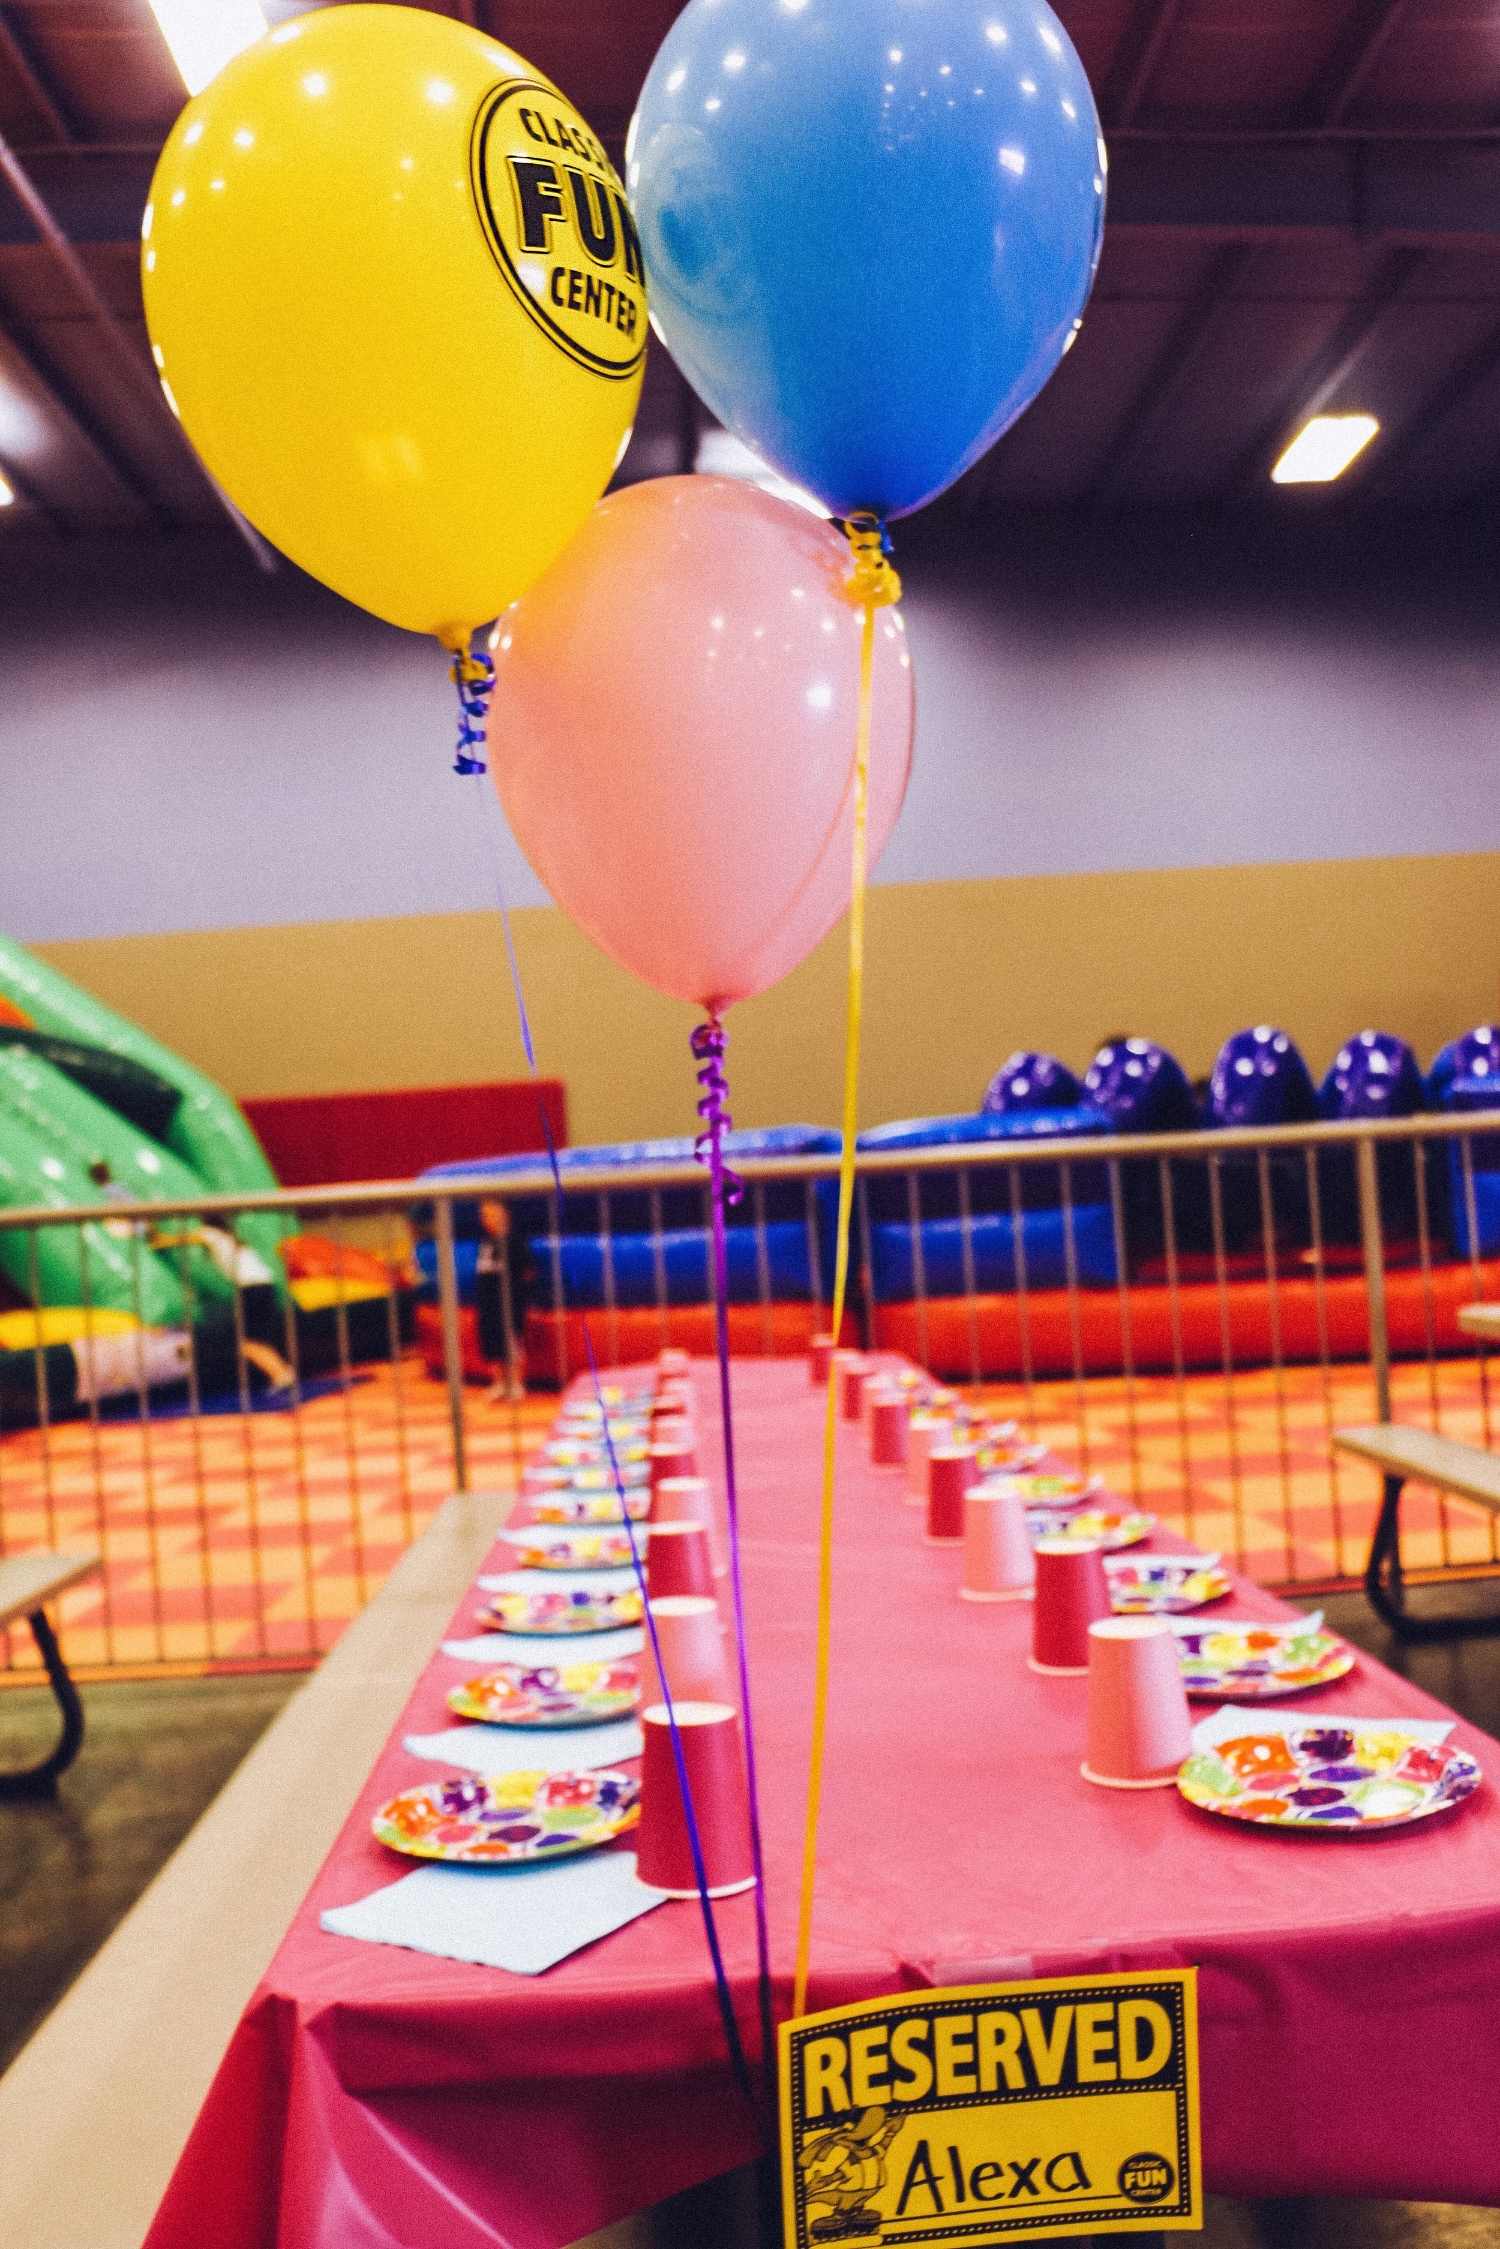  reserved classic fun center birthday party table 